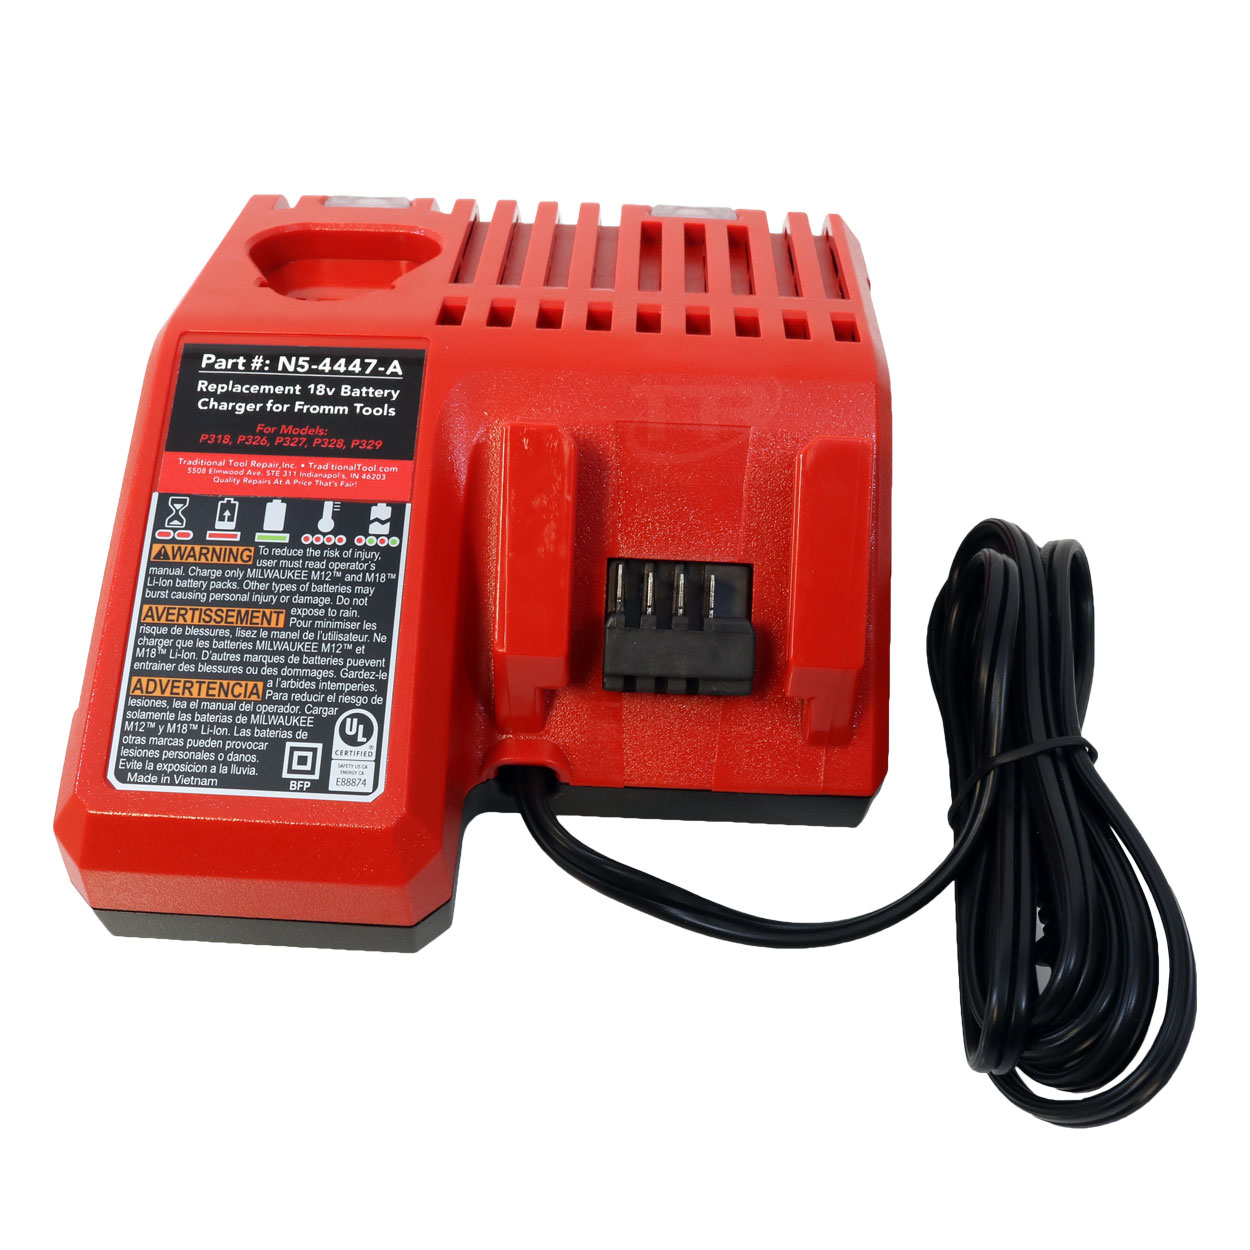 N5-4447-A Replacement 18v Battery Charger For Fromm Strapping Tools